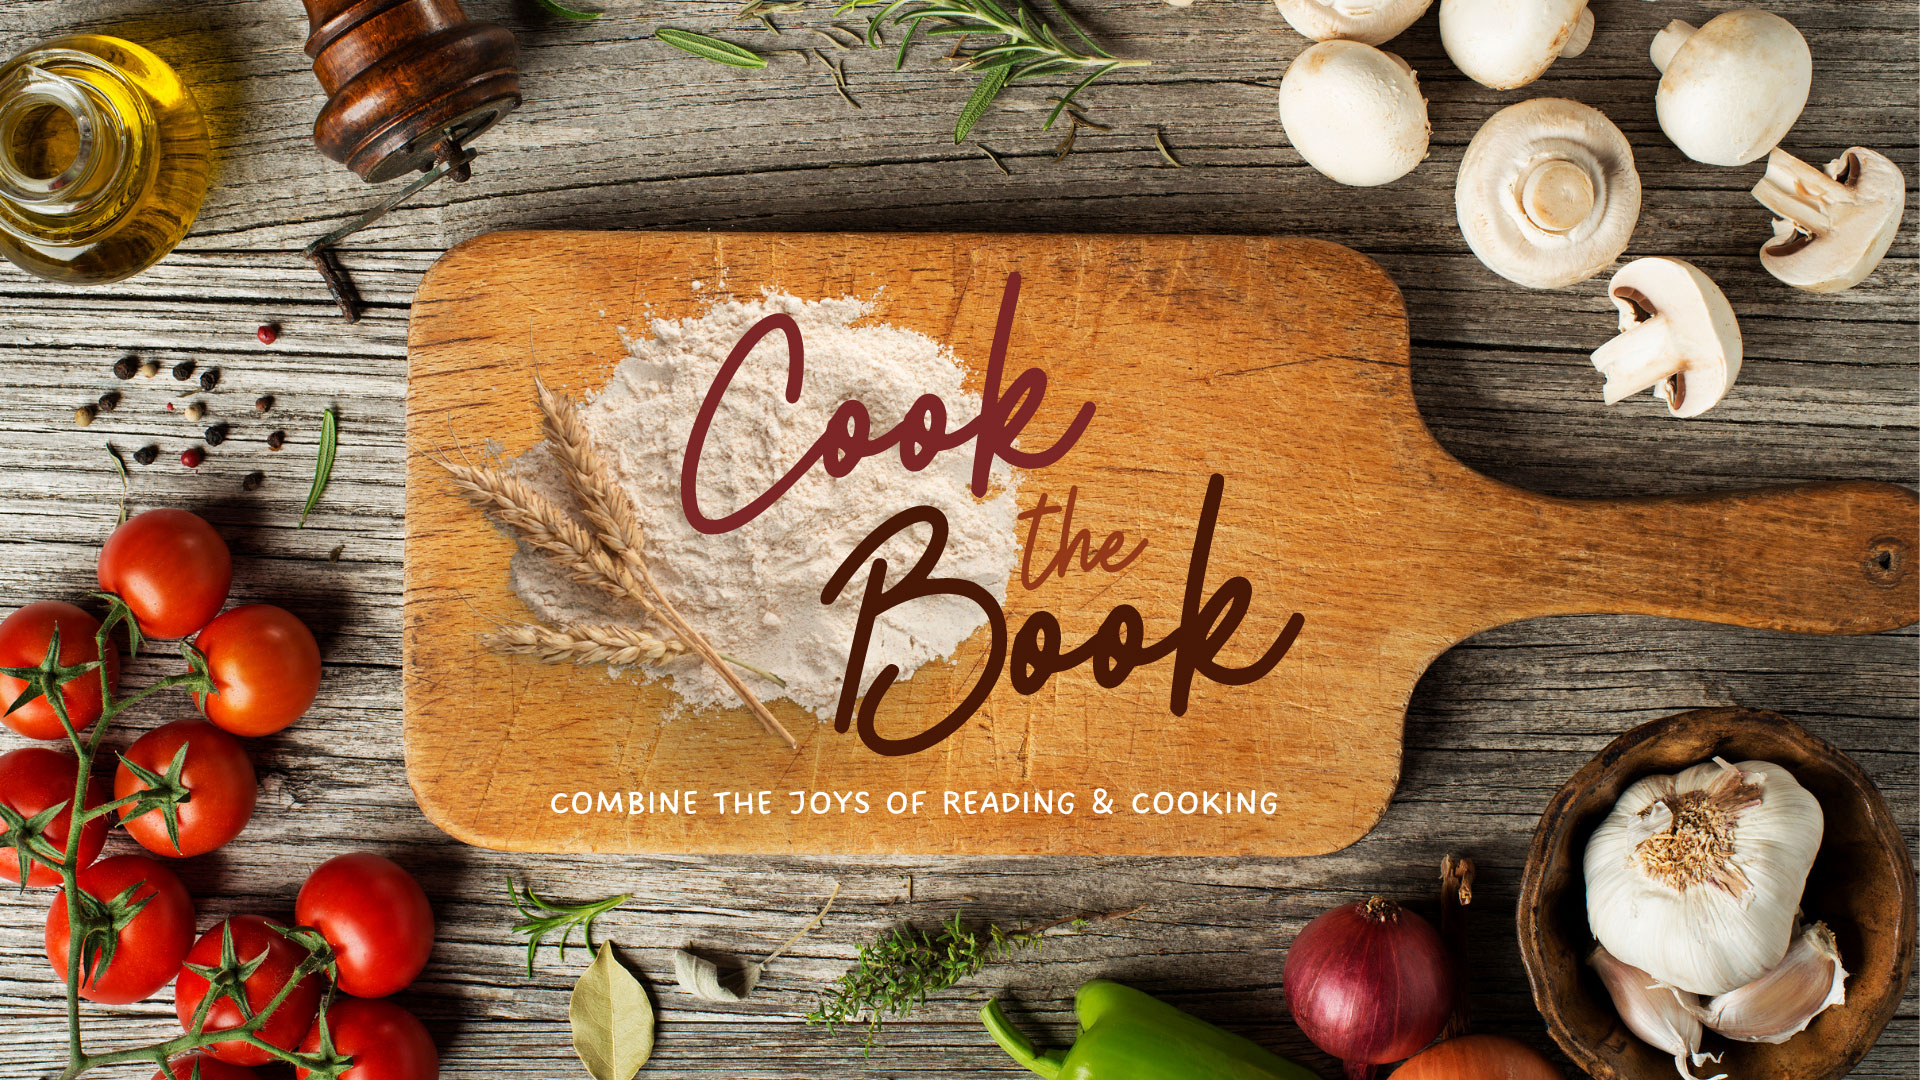 cook the book: cutting board with vegetables, tomatoes, garlic